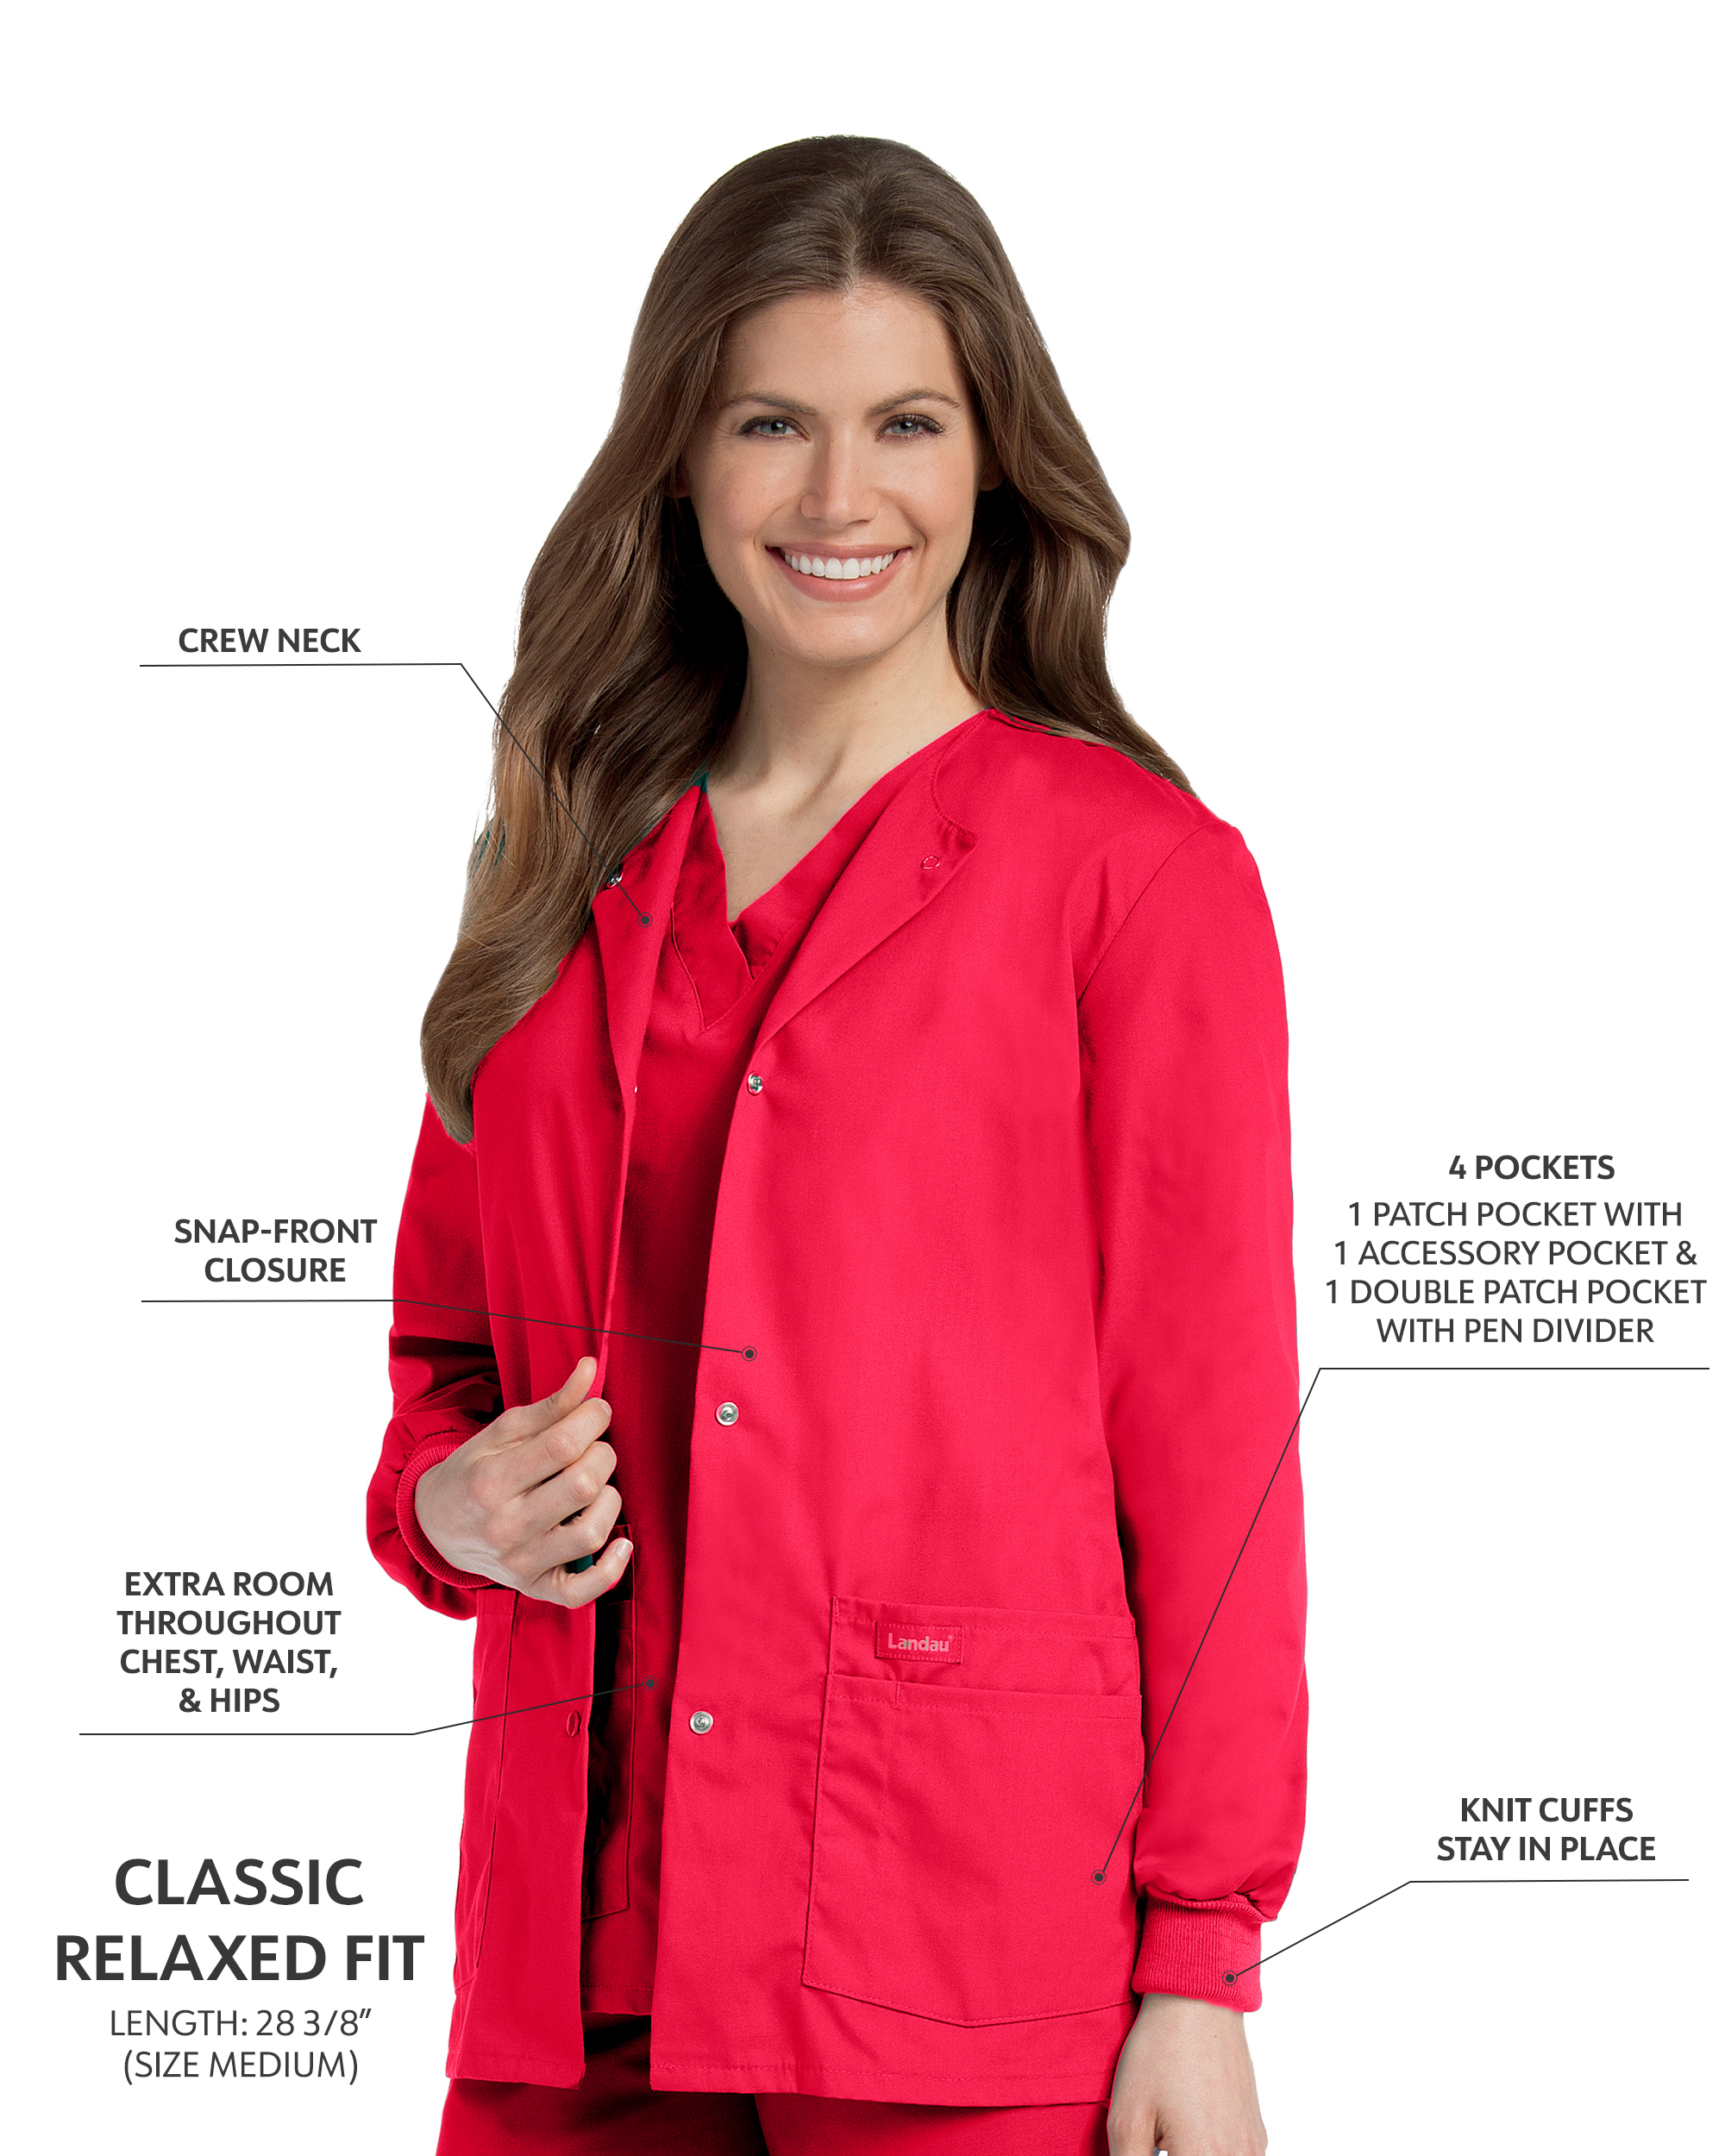 Landau Essentials Relaxed Fit 4-Pocket Snap-Front Scrub Jacket for Women 7525 - image 3 of 6